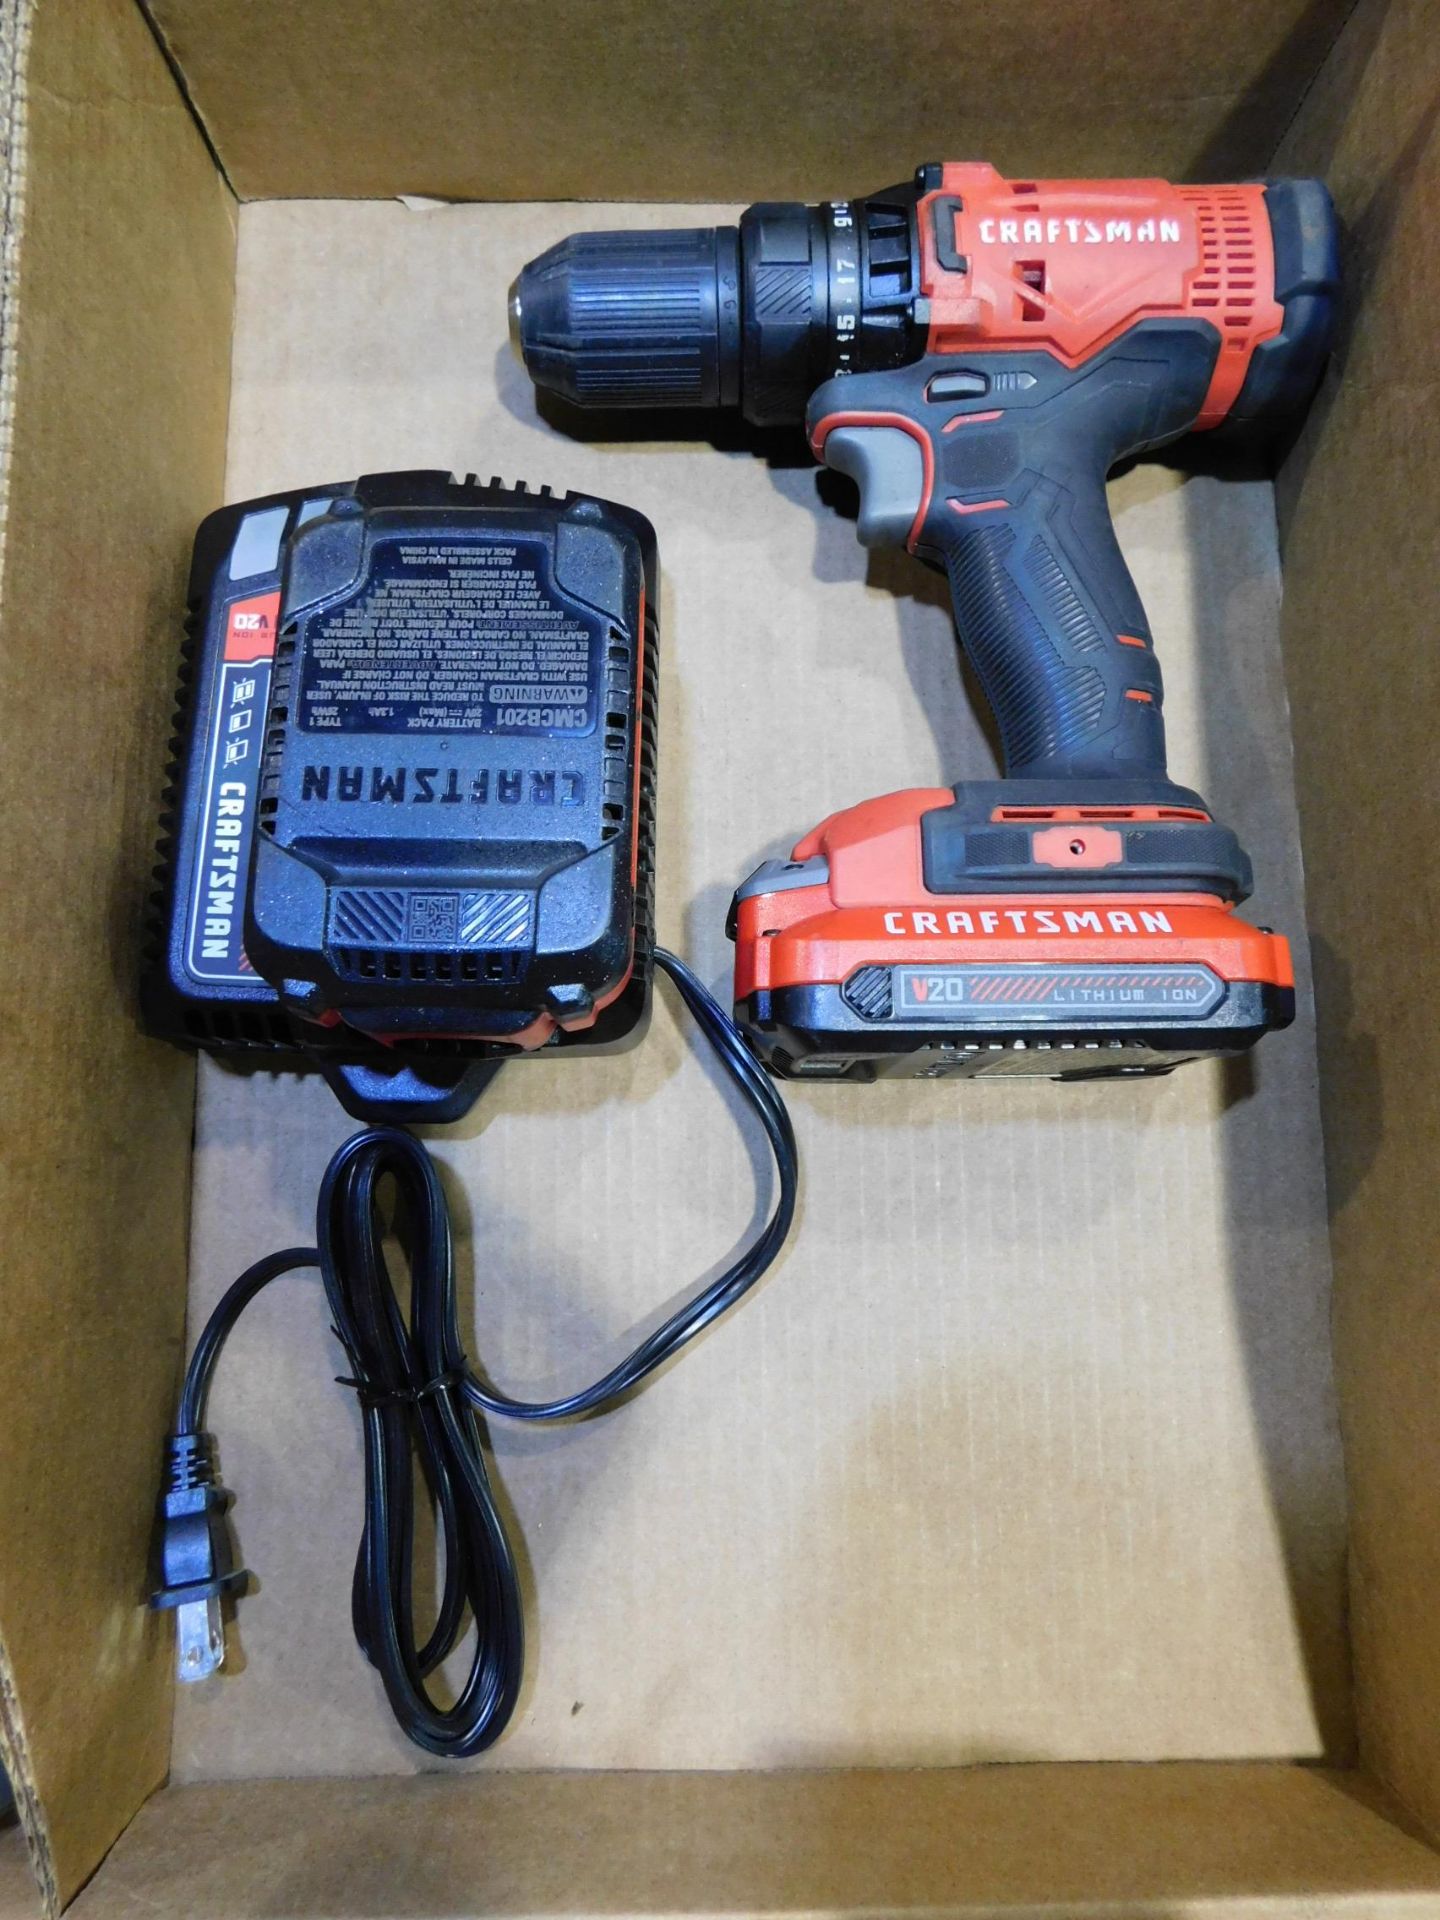 Craftsman 20V Cordless Drill with Batteries and Charger